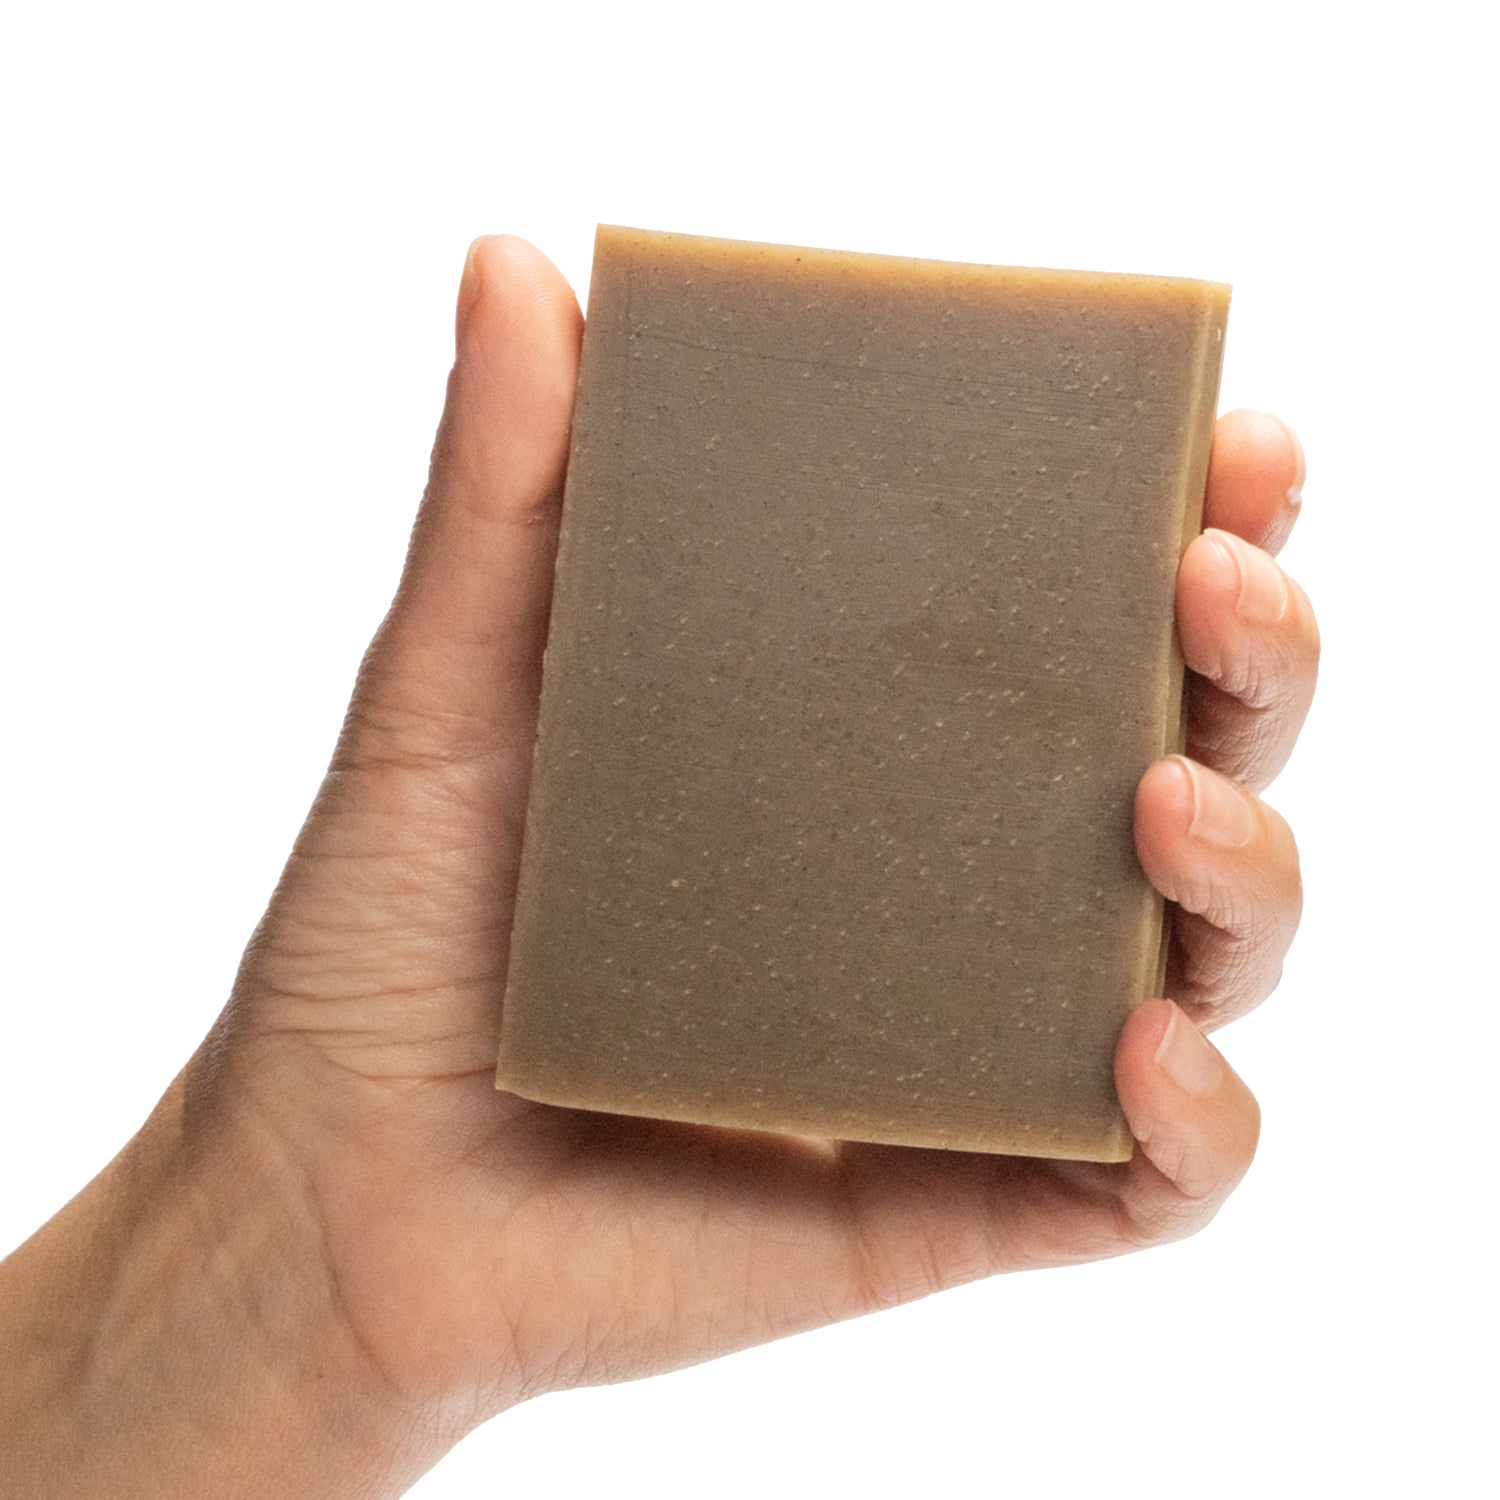 Aum Patchouli essential oil organic bar soap from Ground Soap held in a hand.